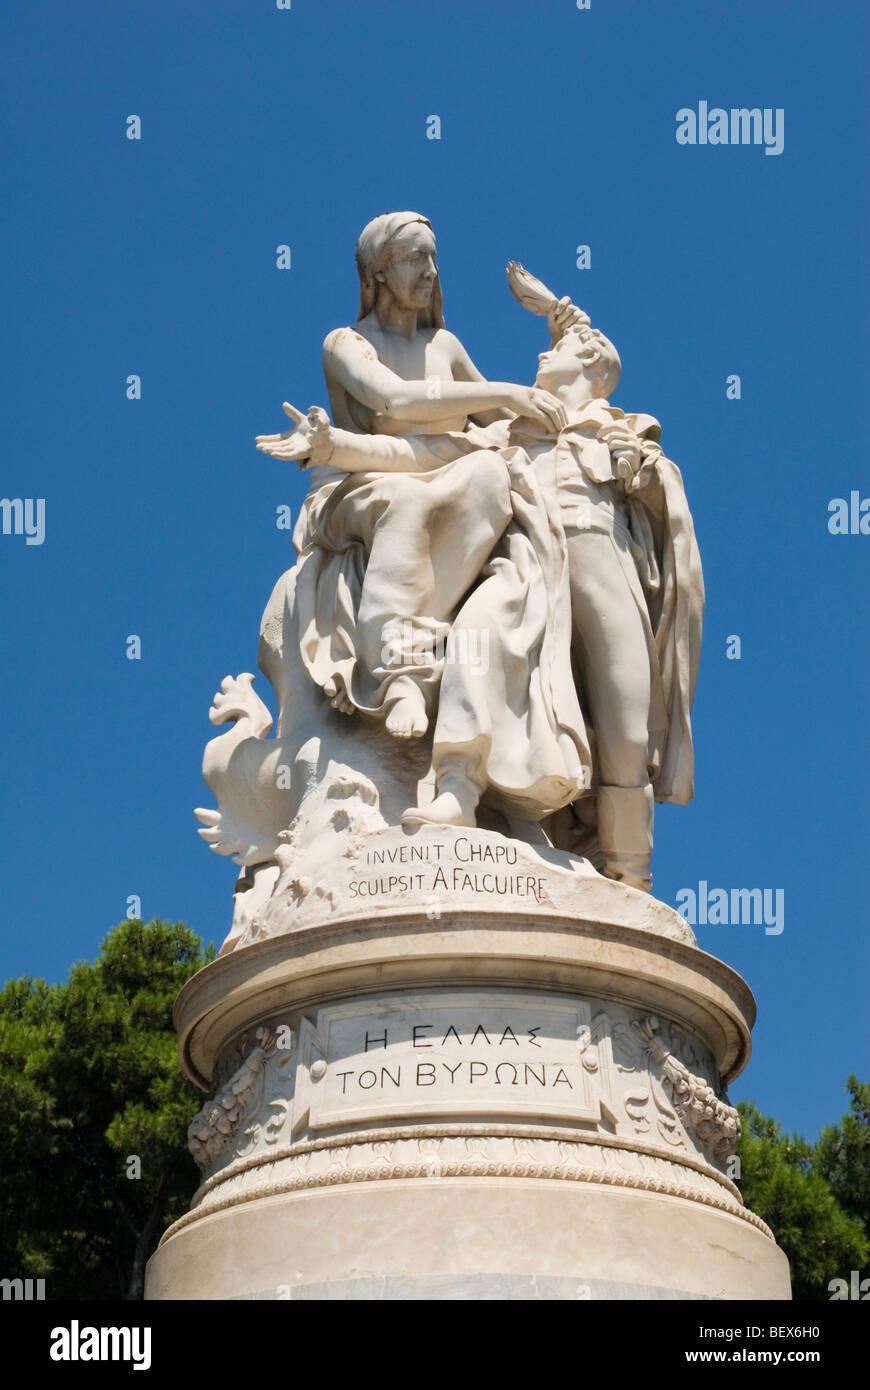 Lord Byron statue in Athens, Greece Stock Photo